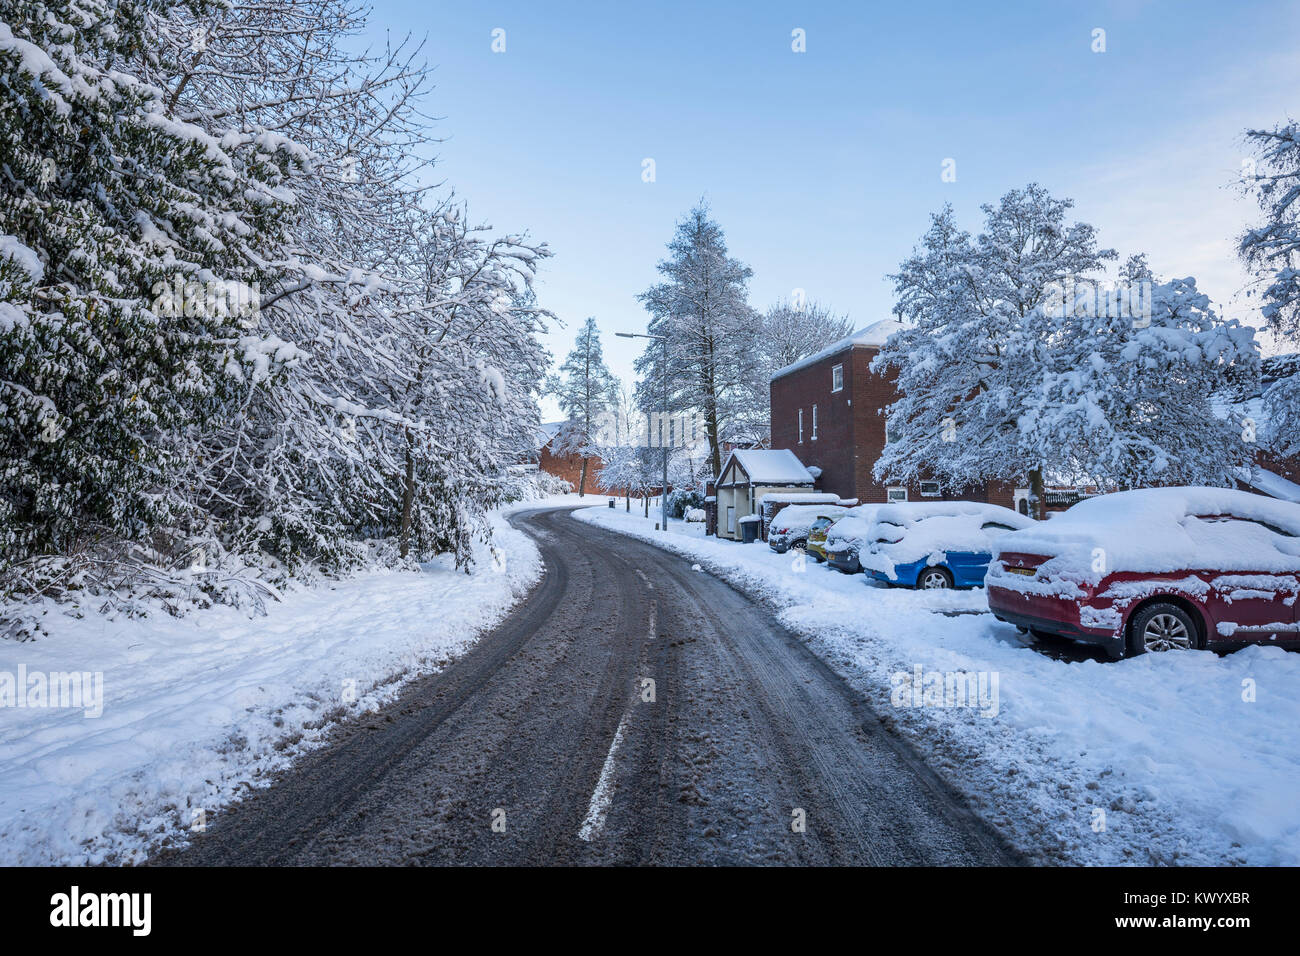 Empty asphalt road across residential area in United Kngdom with cars and trees covered in snow Stock Photo